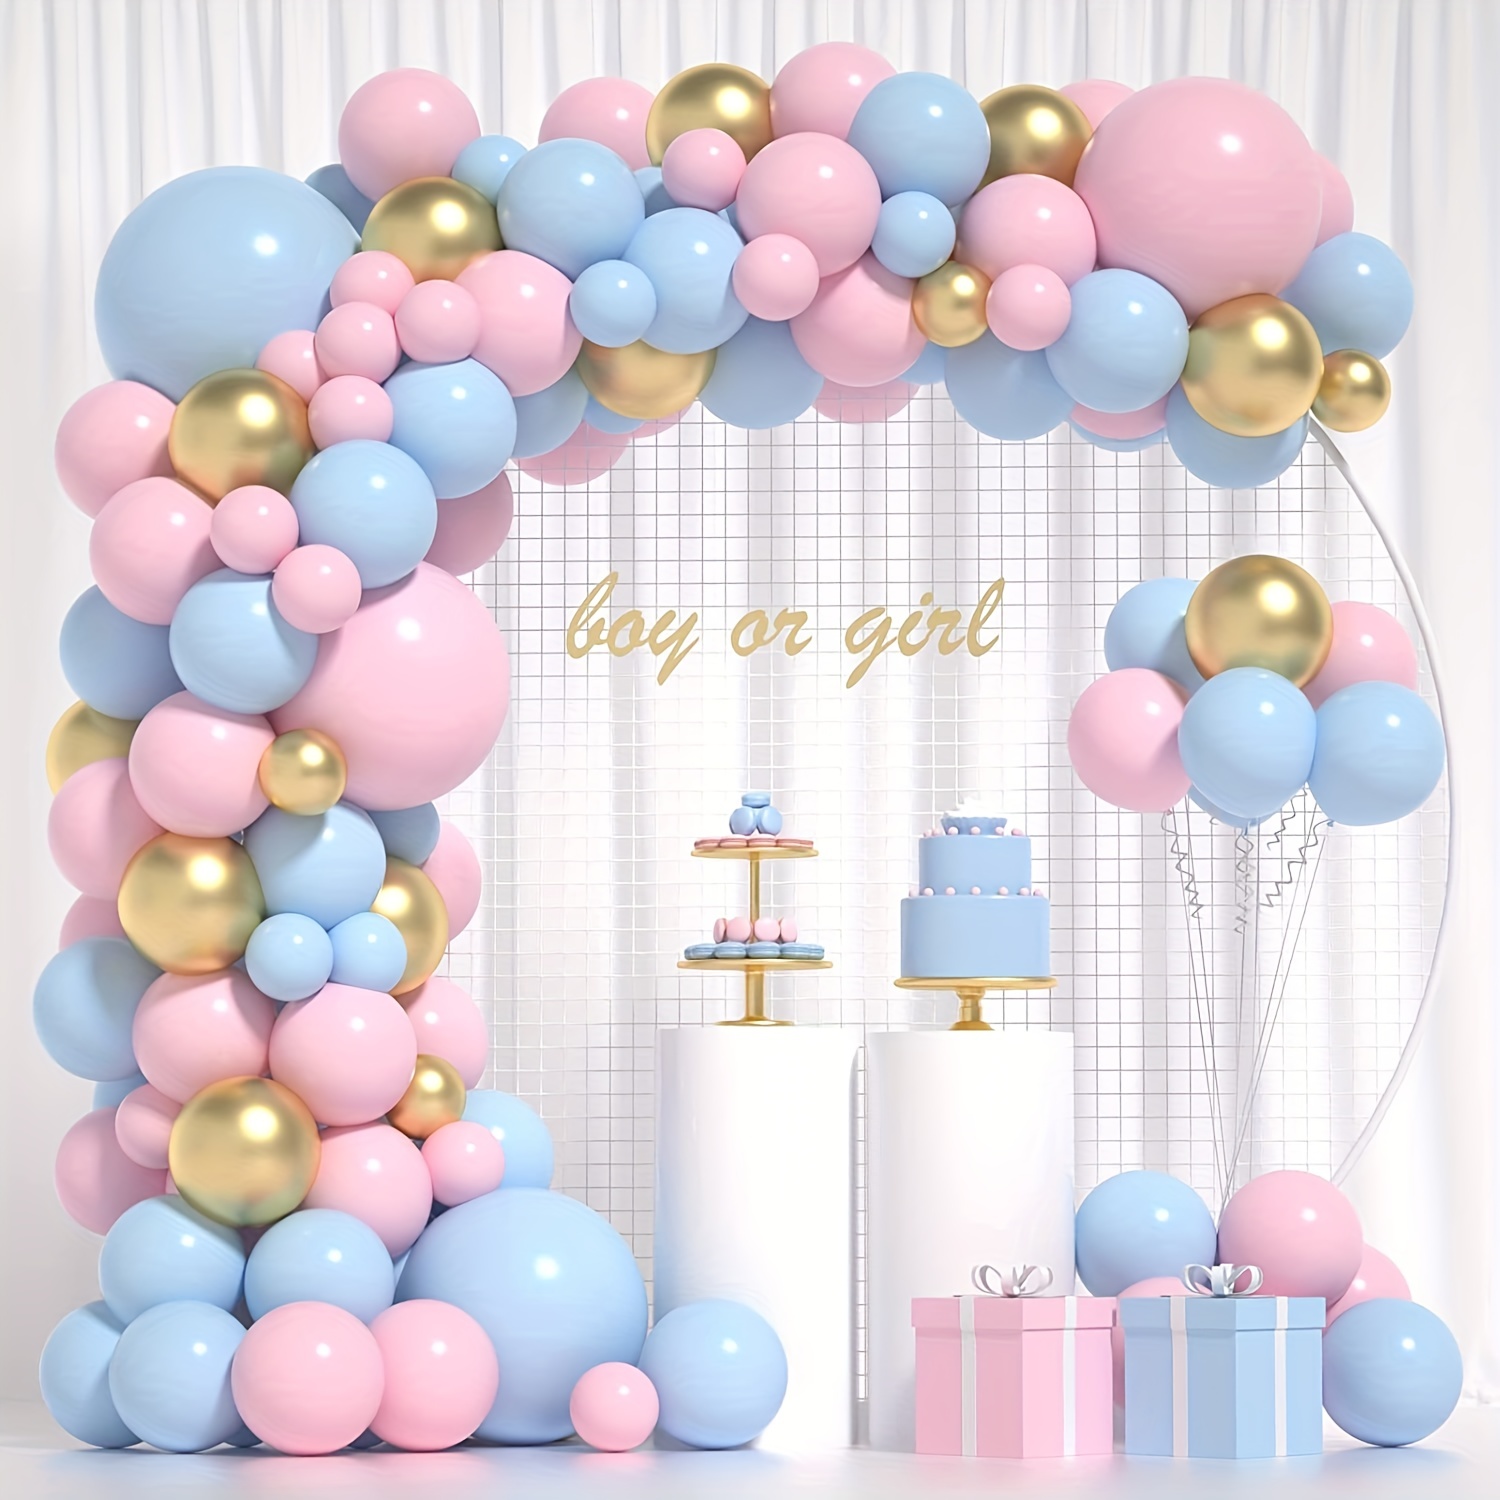 142pcs, Gender Reveal Balloons Arch Kit - Pink and Blue Metallic Balloons  for He or She, Boy or Girl Party Supplies - Gender Reveal Decorations for Ge